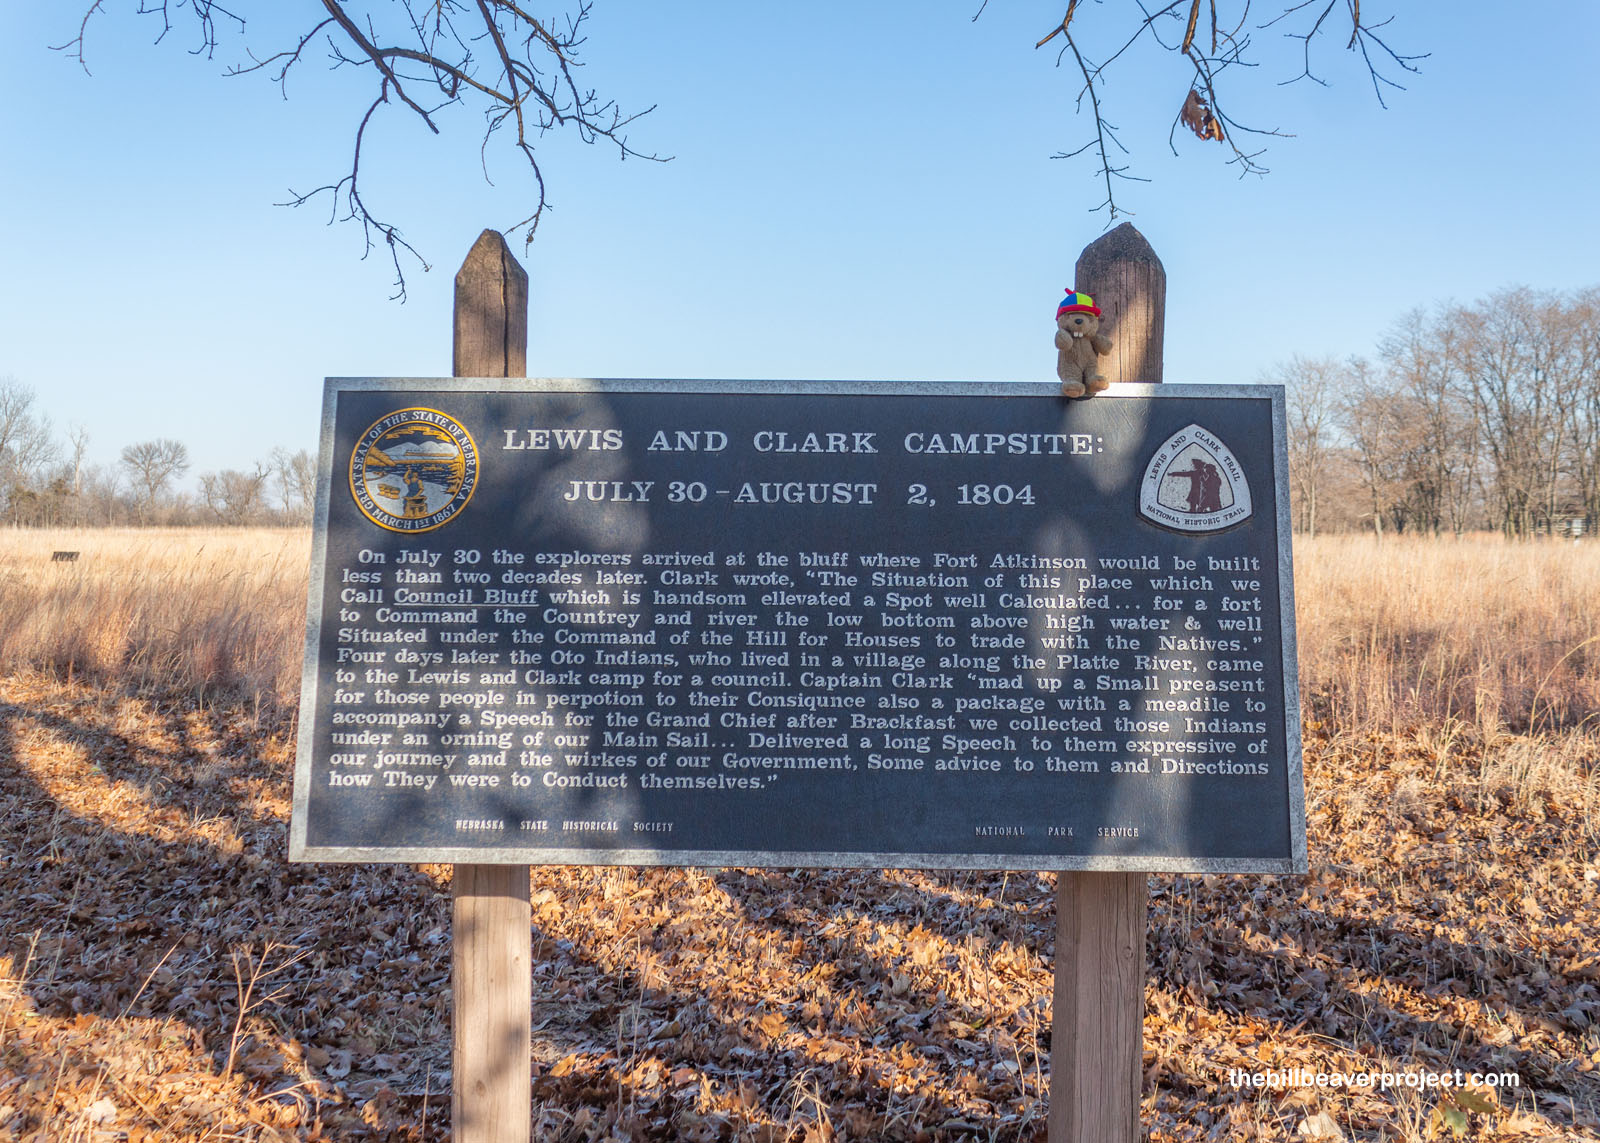 Lewis and Clark Camp Site: July 30 - Aug 2, 1804